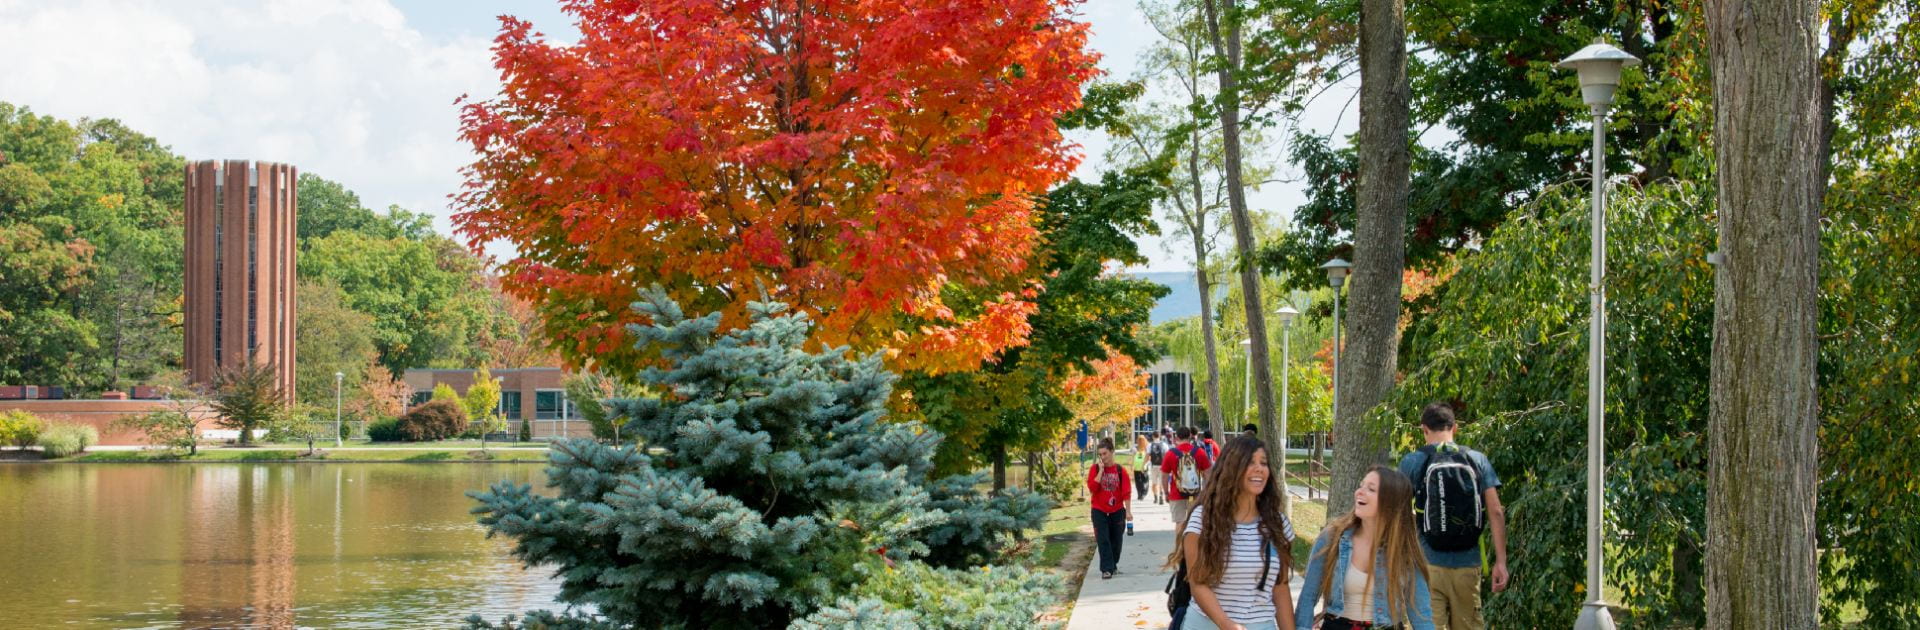 Students walking across the Altoona campus in fall